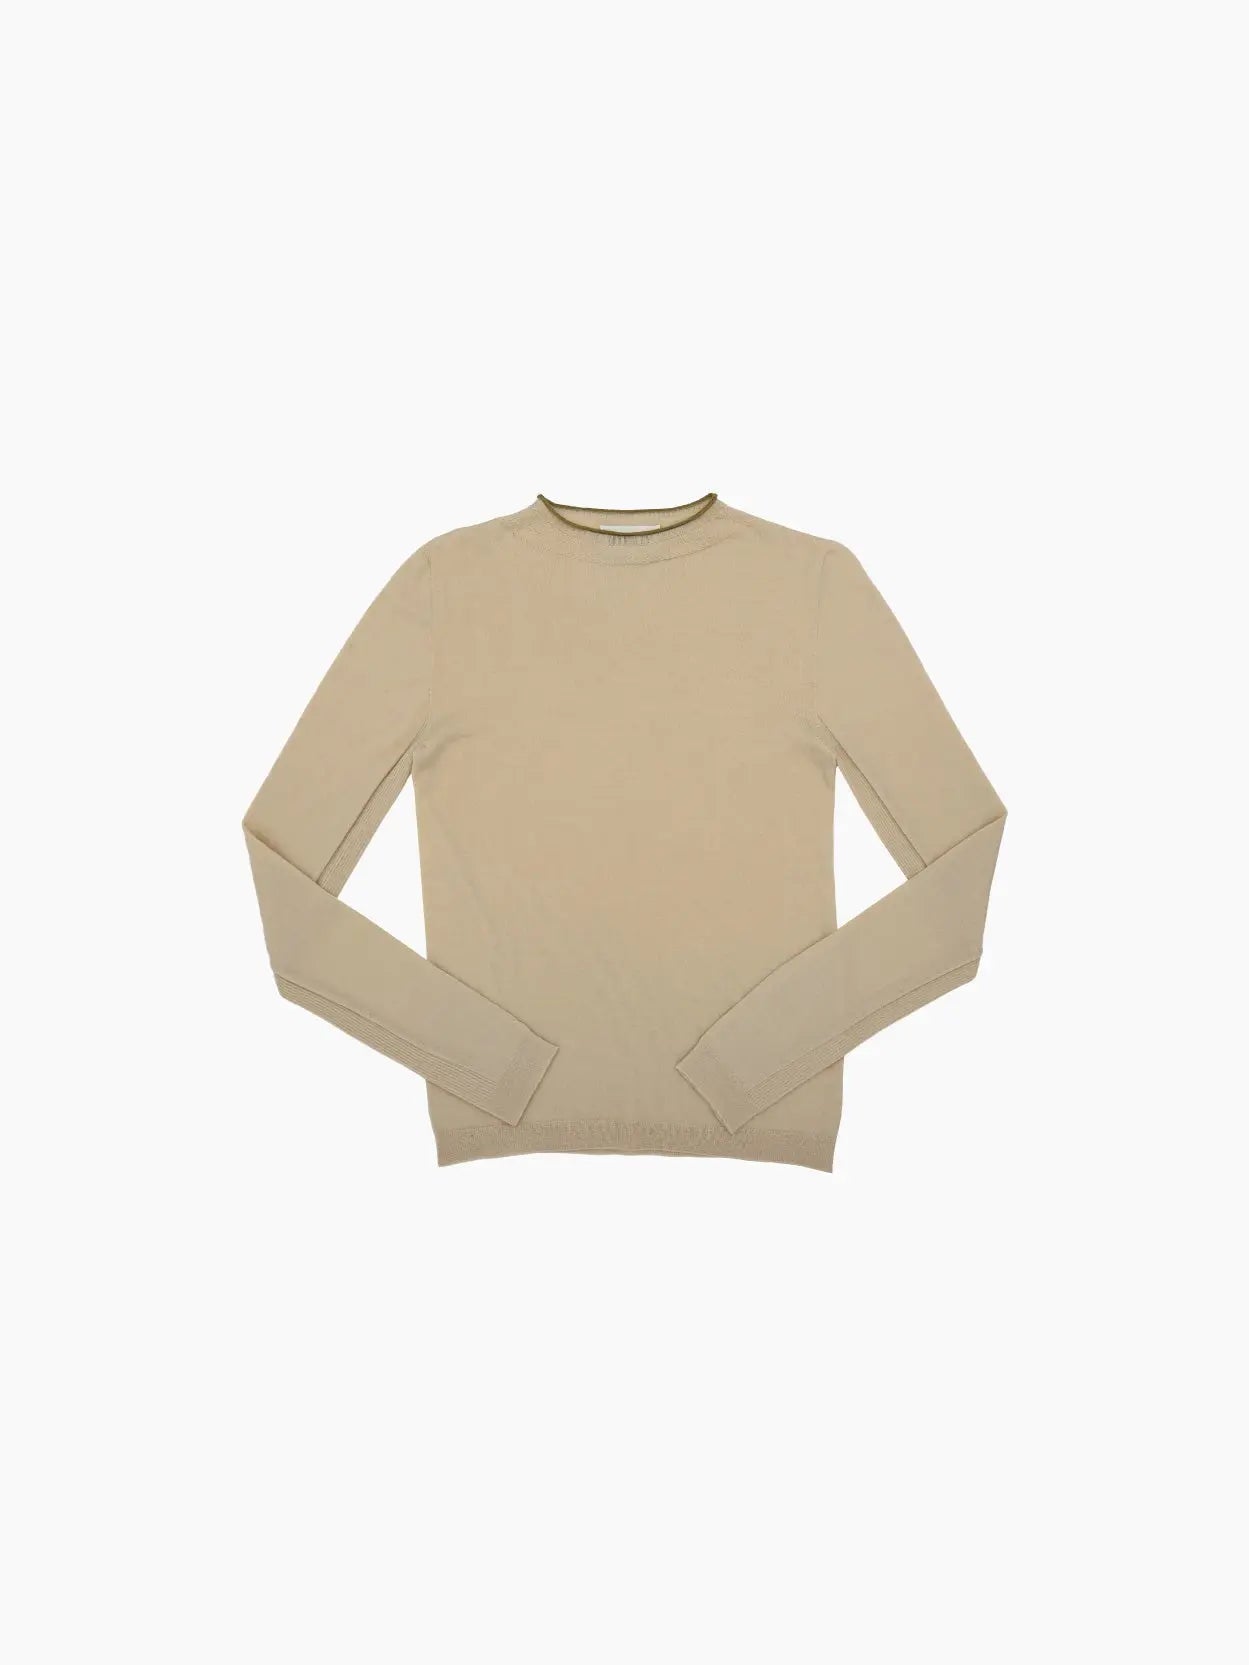 Beige, full-sleeve, crew-neck **Wist Sweater Cream** from **Bielo** laid flat on a white background. The sweater is plain with no visible patterns or designs. Discover timeless elegance with this essential piece from your favorite Barcelona-based store.